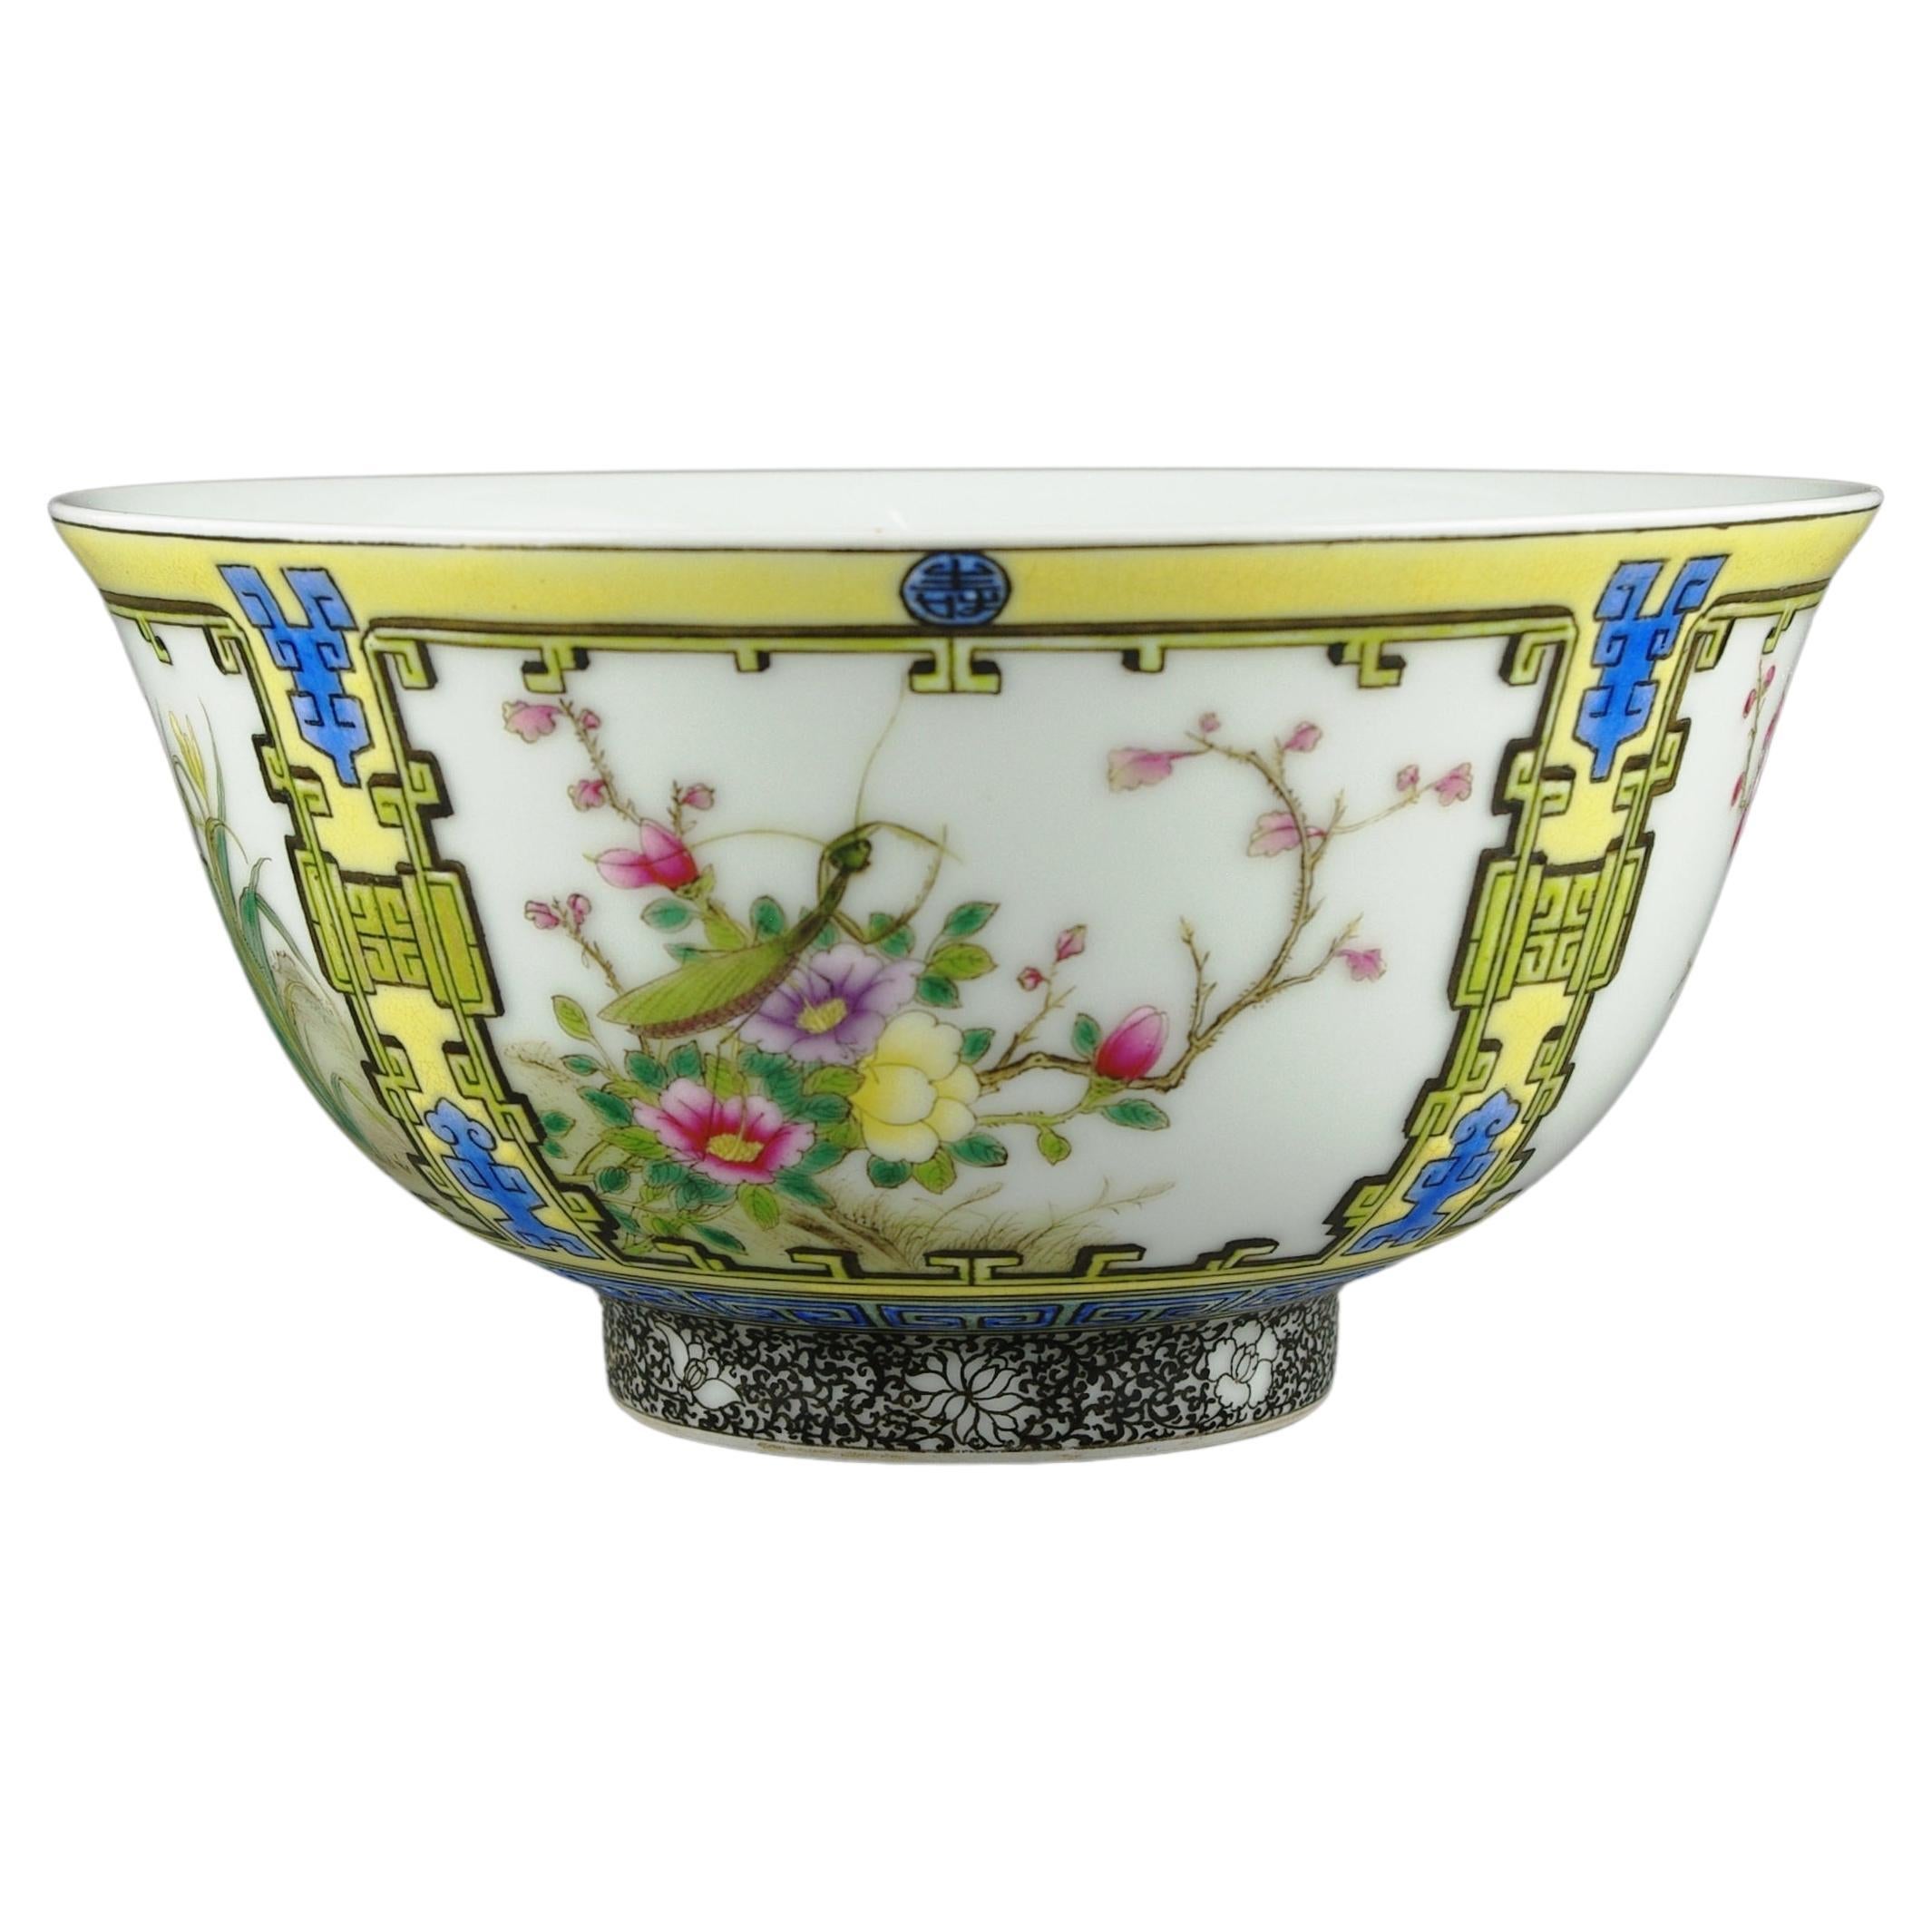 Fine Chinese Porcelain Famille Rose Insects Flowers on 4 Panels Yellow Bowl 20c For Sale